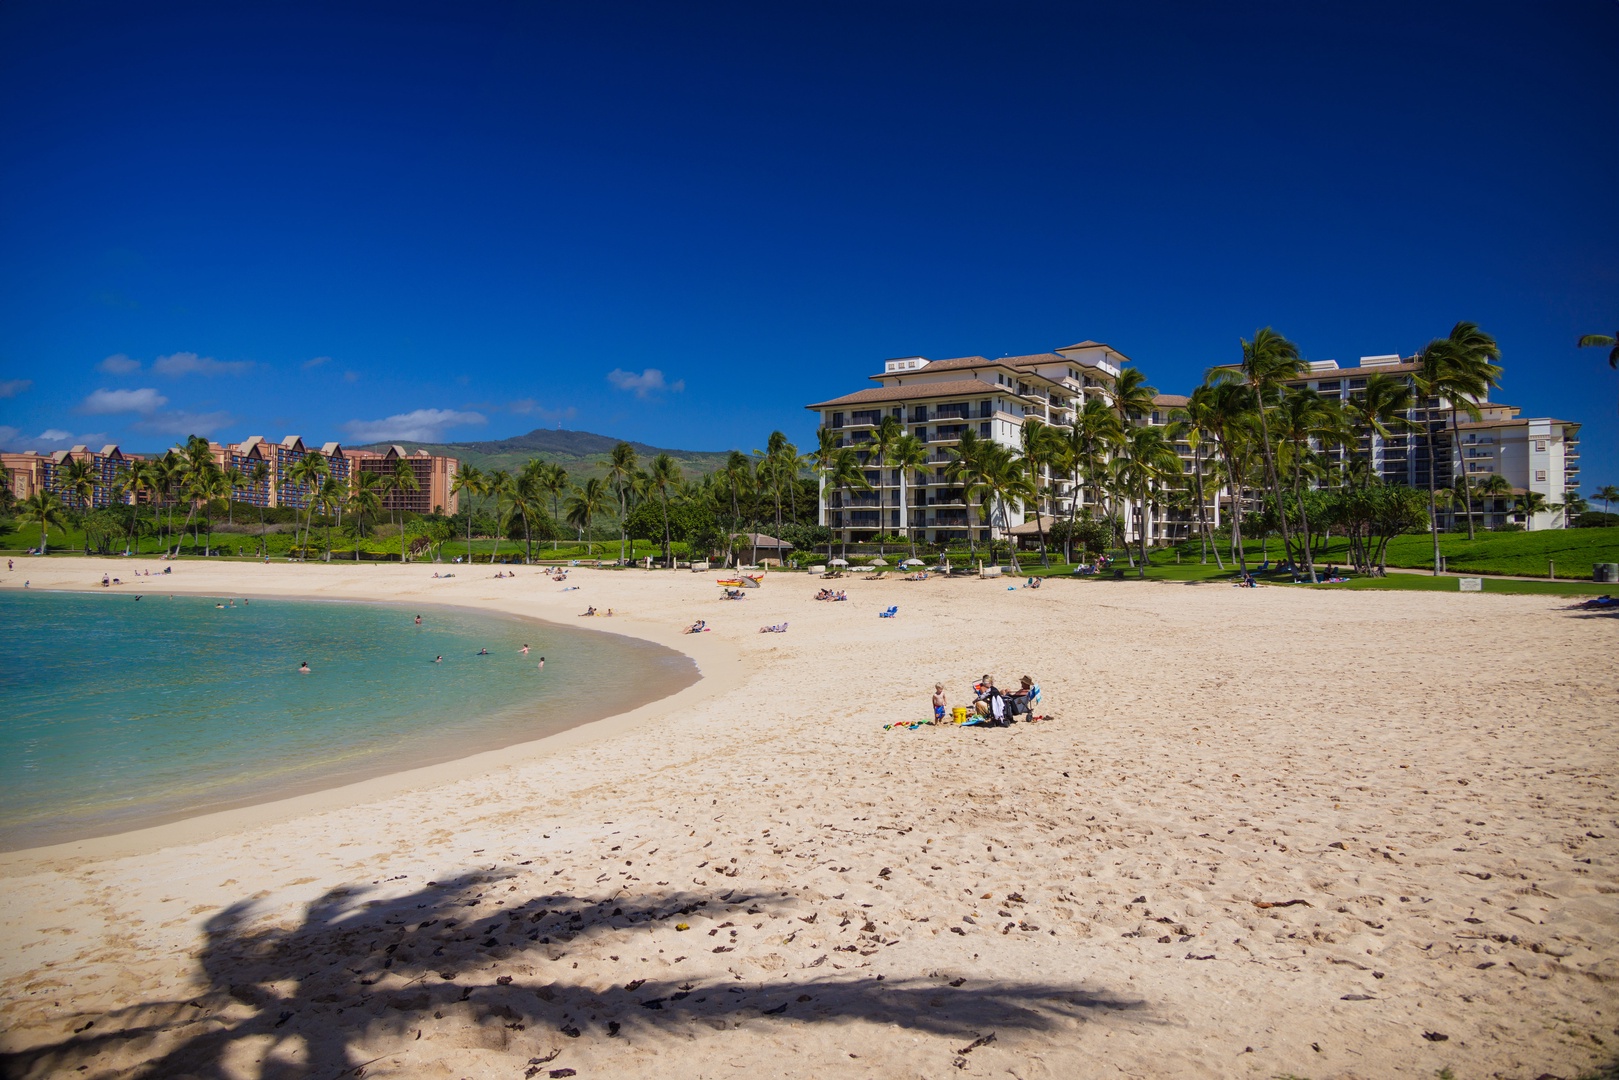 Kapolei Vacation Rentals, Ko Olina Kai 1027A - Ko Olina's private lagoons with soft sands and crystal blue water, perfect for afternoon swim or spectacular views.